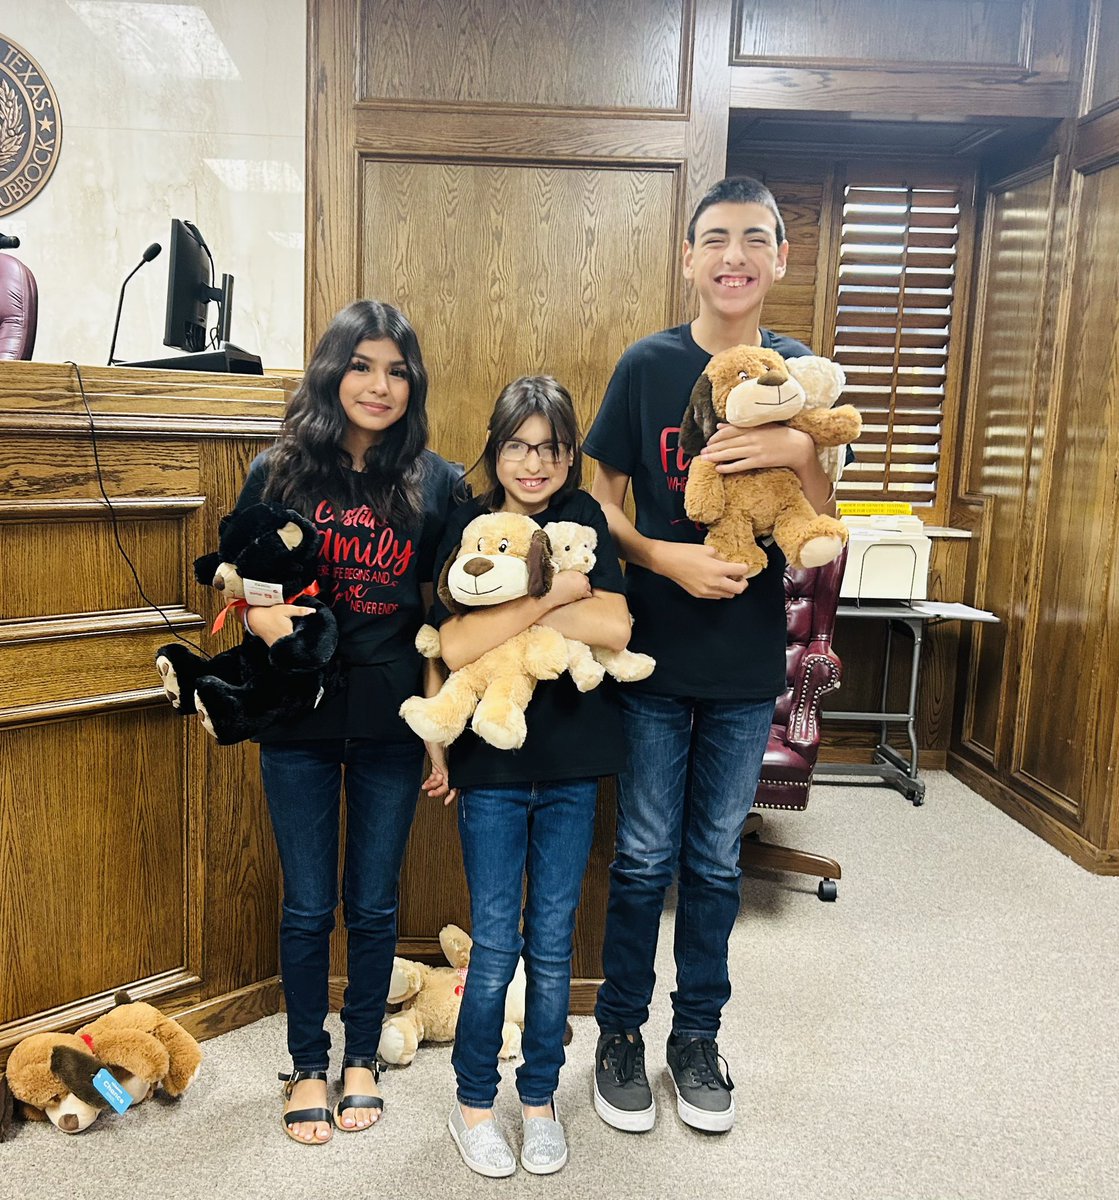 HAPPY ADOPTION DAY!!! Sooooo excited for this amazing family! 🥰 I’m so HAPPY that these sweet kids finally got their forever family! ❤️   #adoption #adoptionislove #adoptionday #gotchaday #fostertoadopt #fostercare #changealife #stopchildabusenow #everychildmatters #adopted